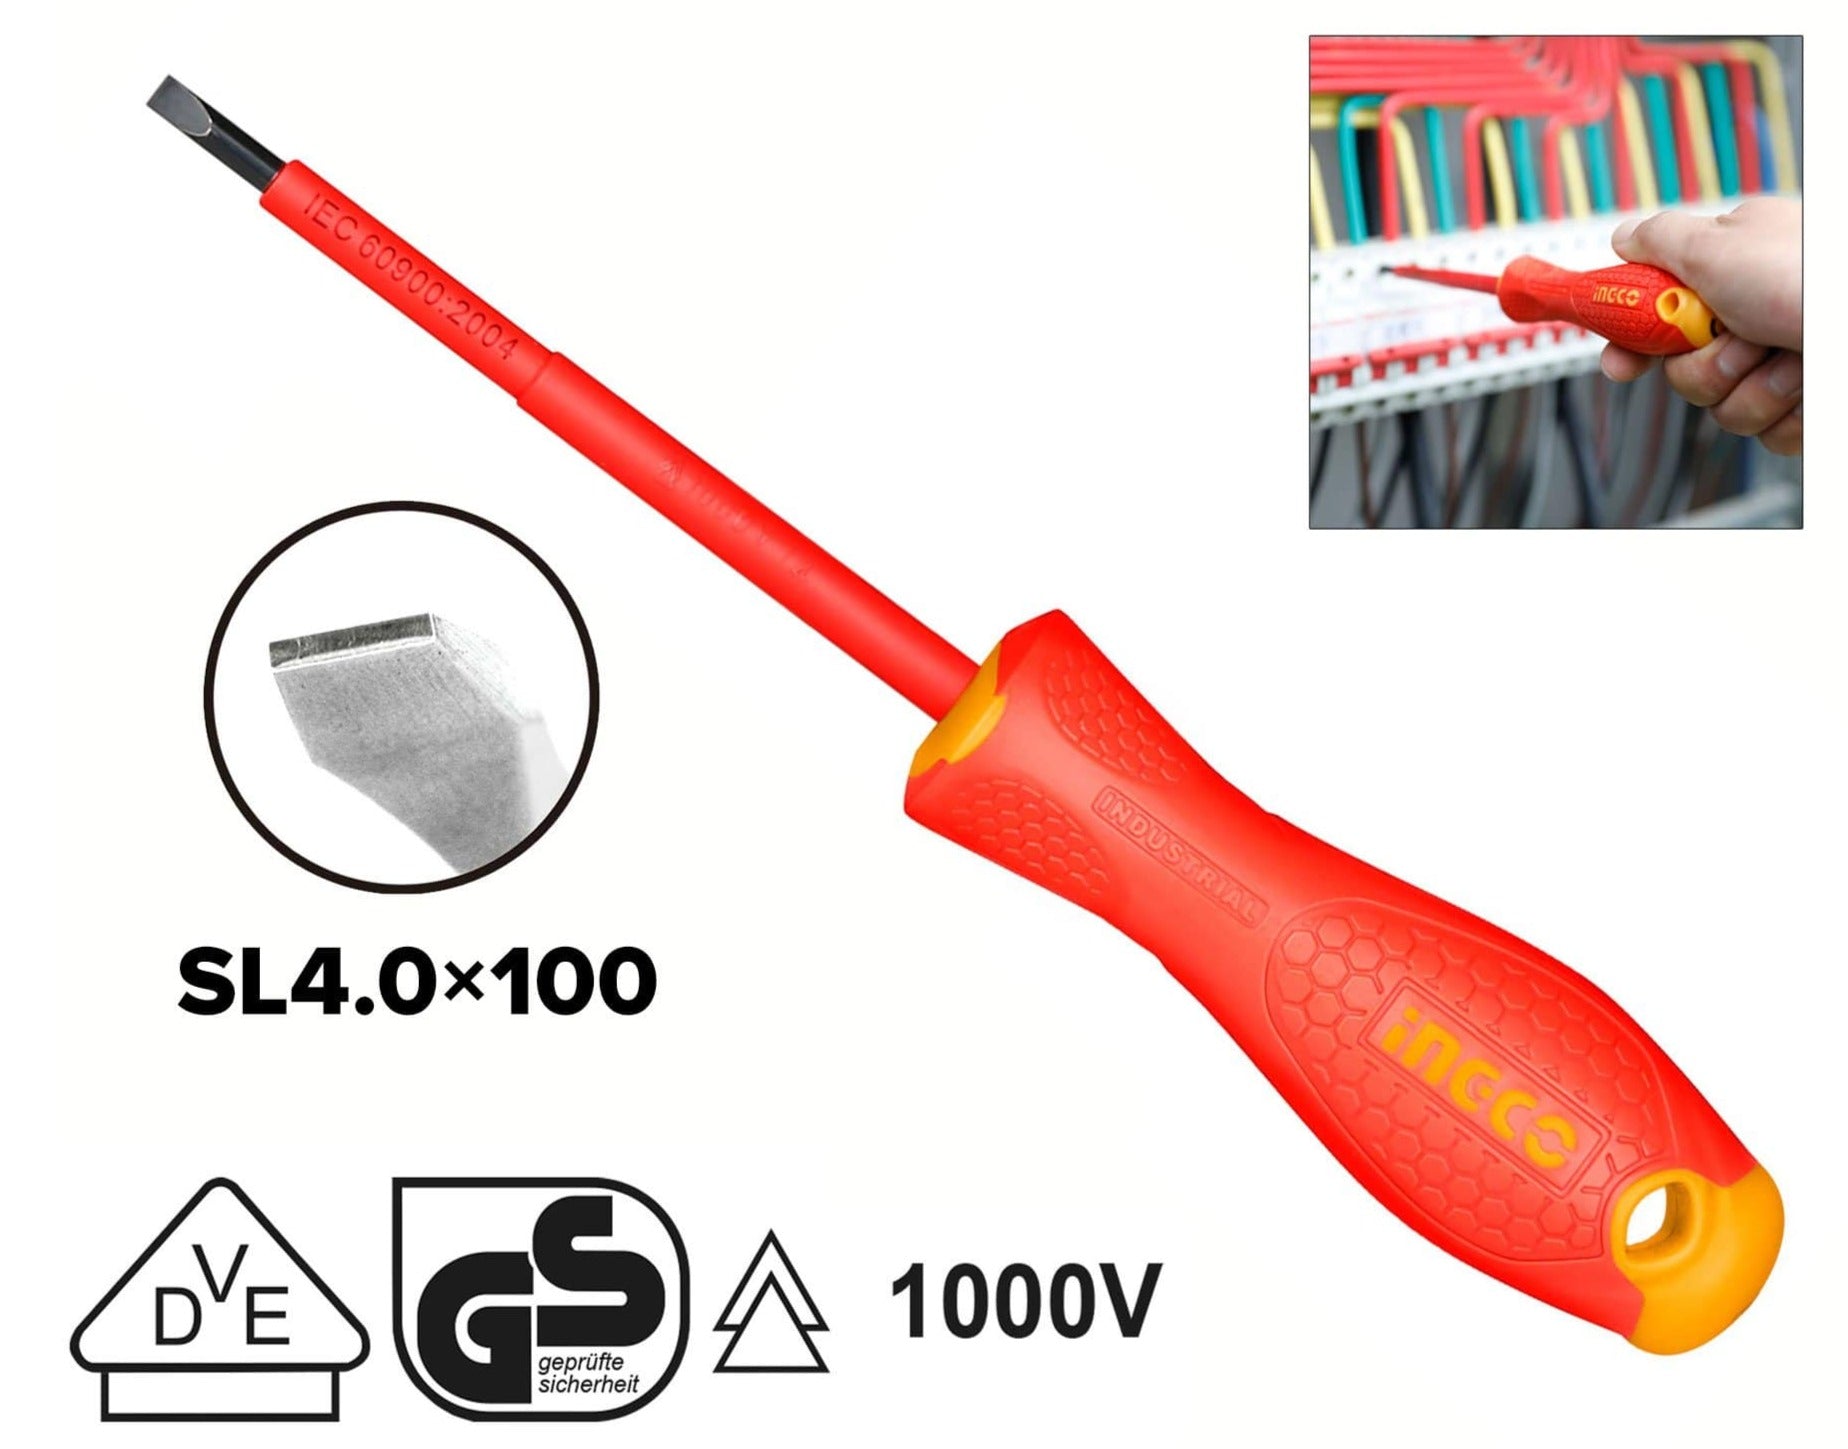 Ingco Insulated Screwdriver | Supply Master | Accra, Ghana Tools Building Steel Engineering Hardware tool